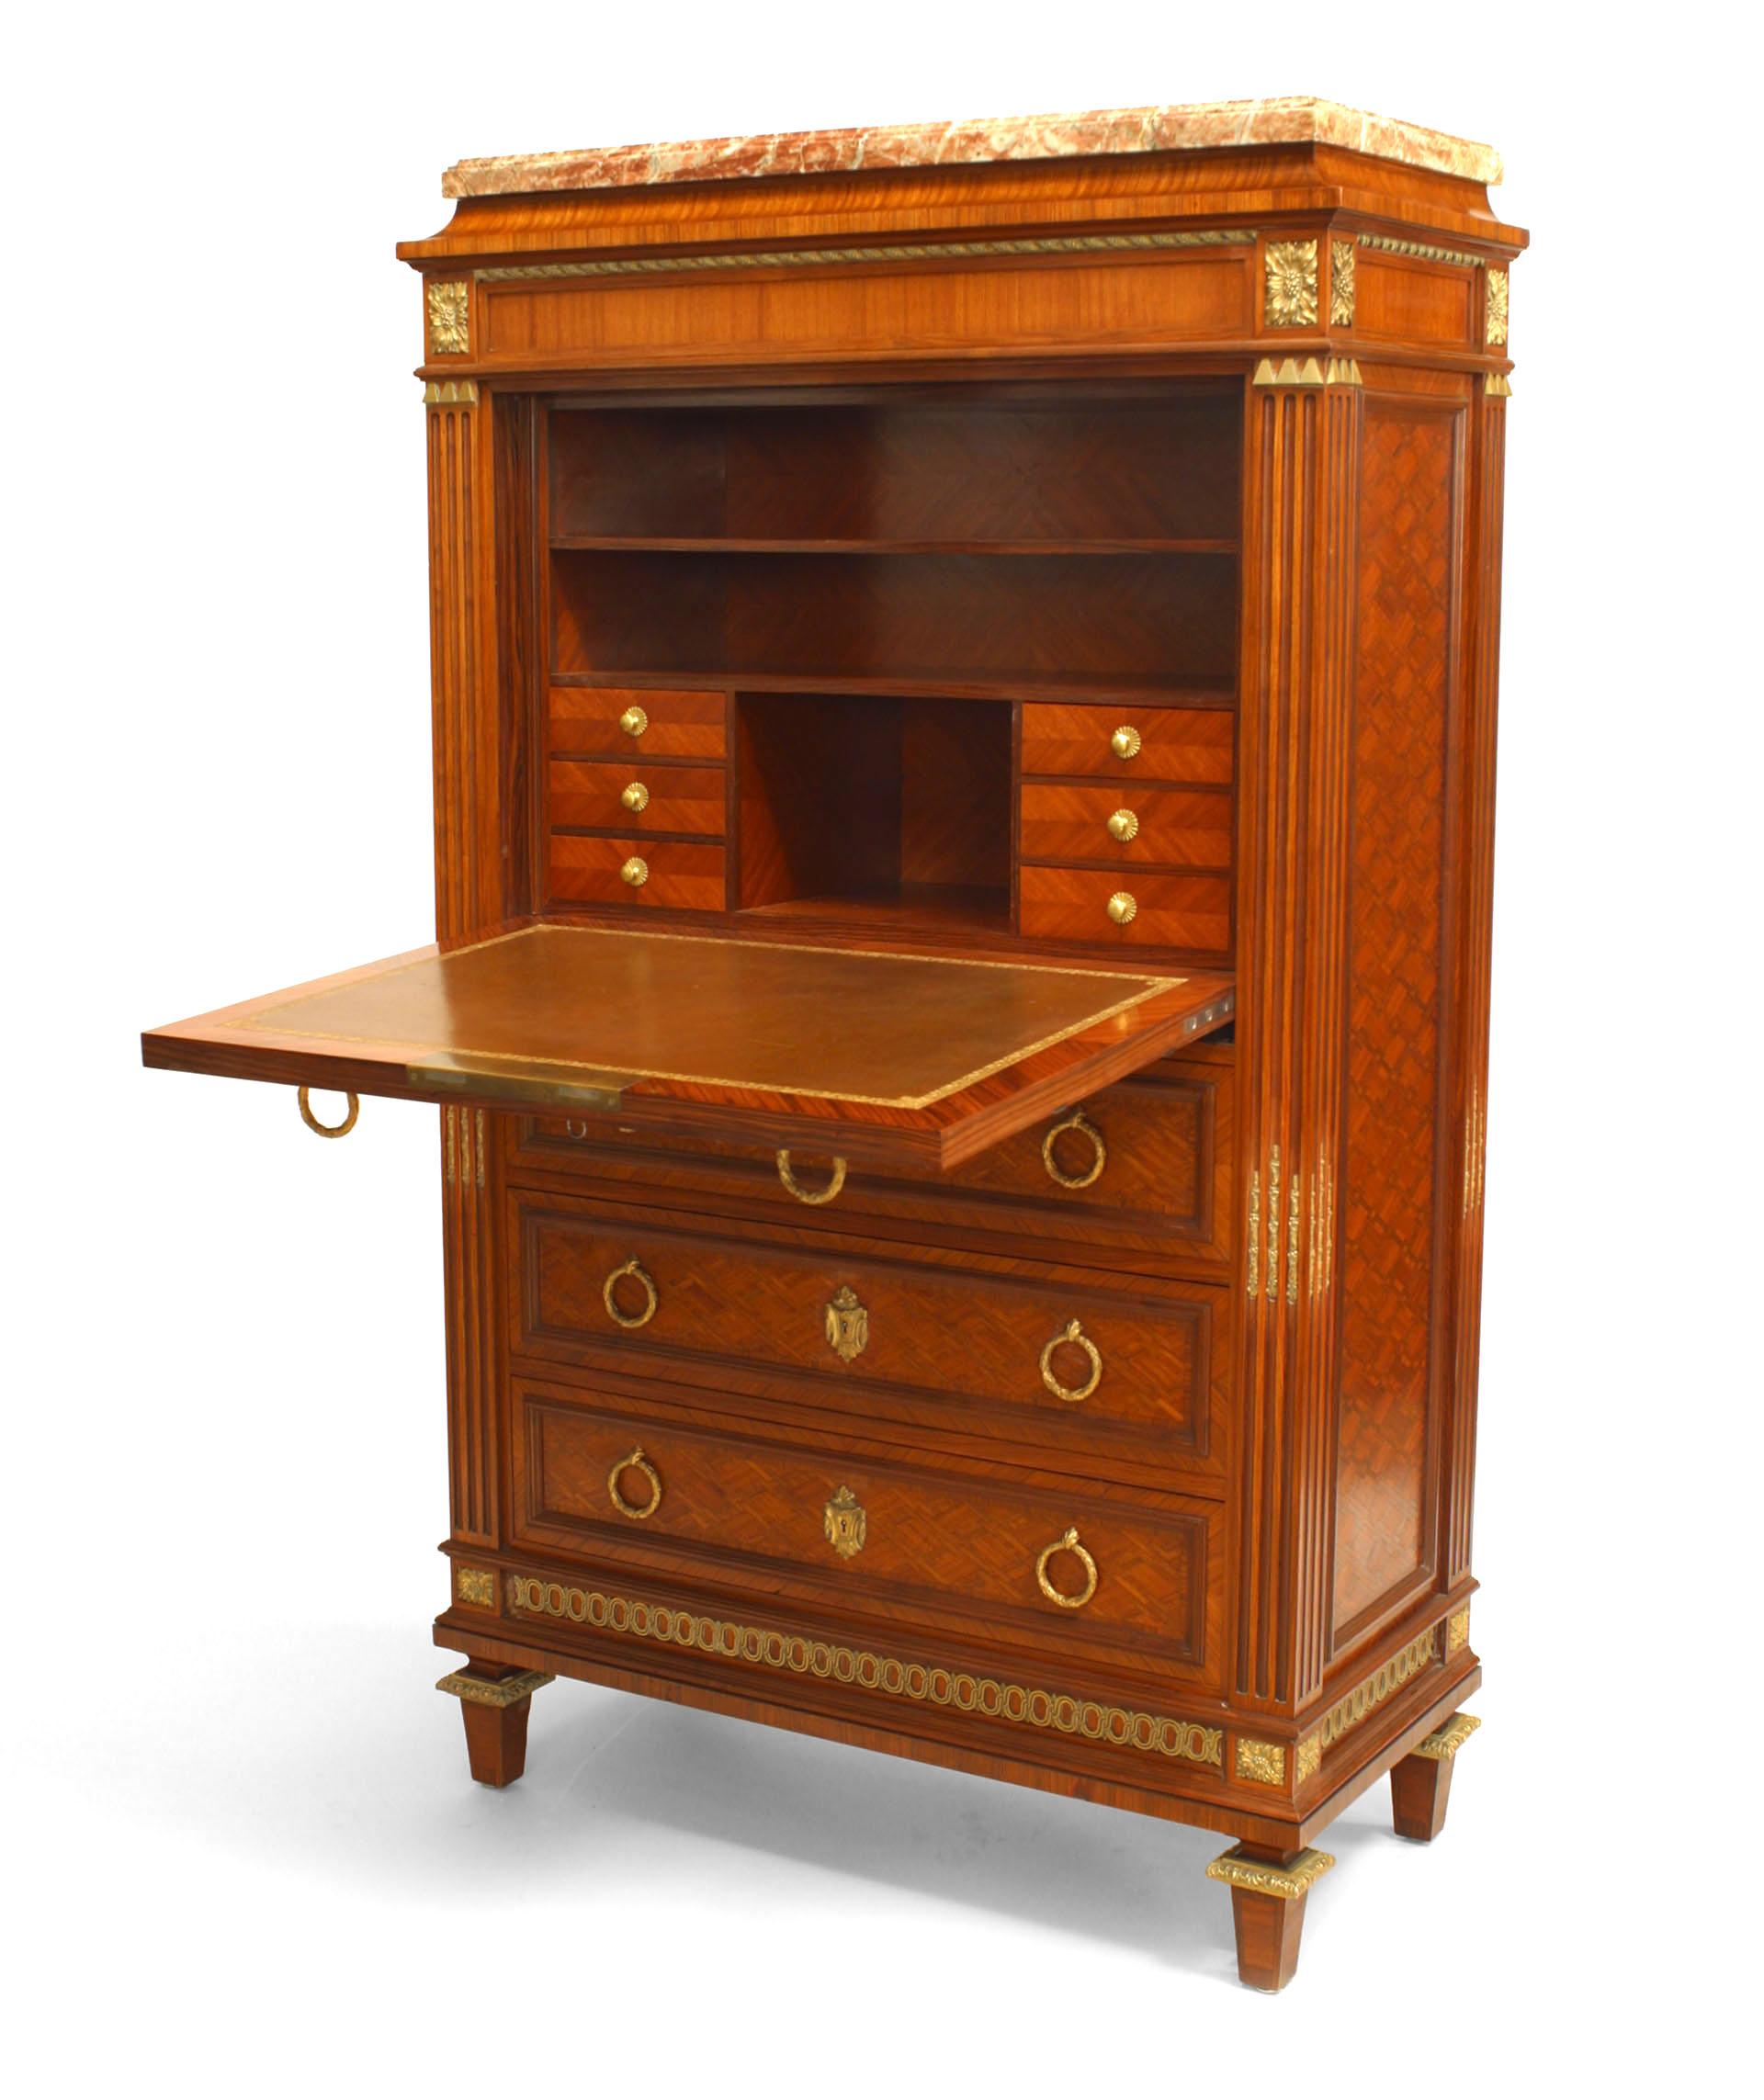 Parquetry French Louis XVI Style Inlaid Secretary For Sale